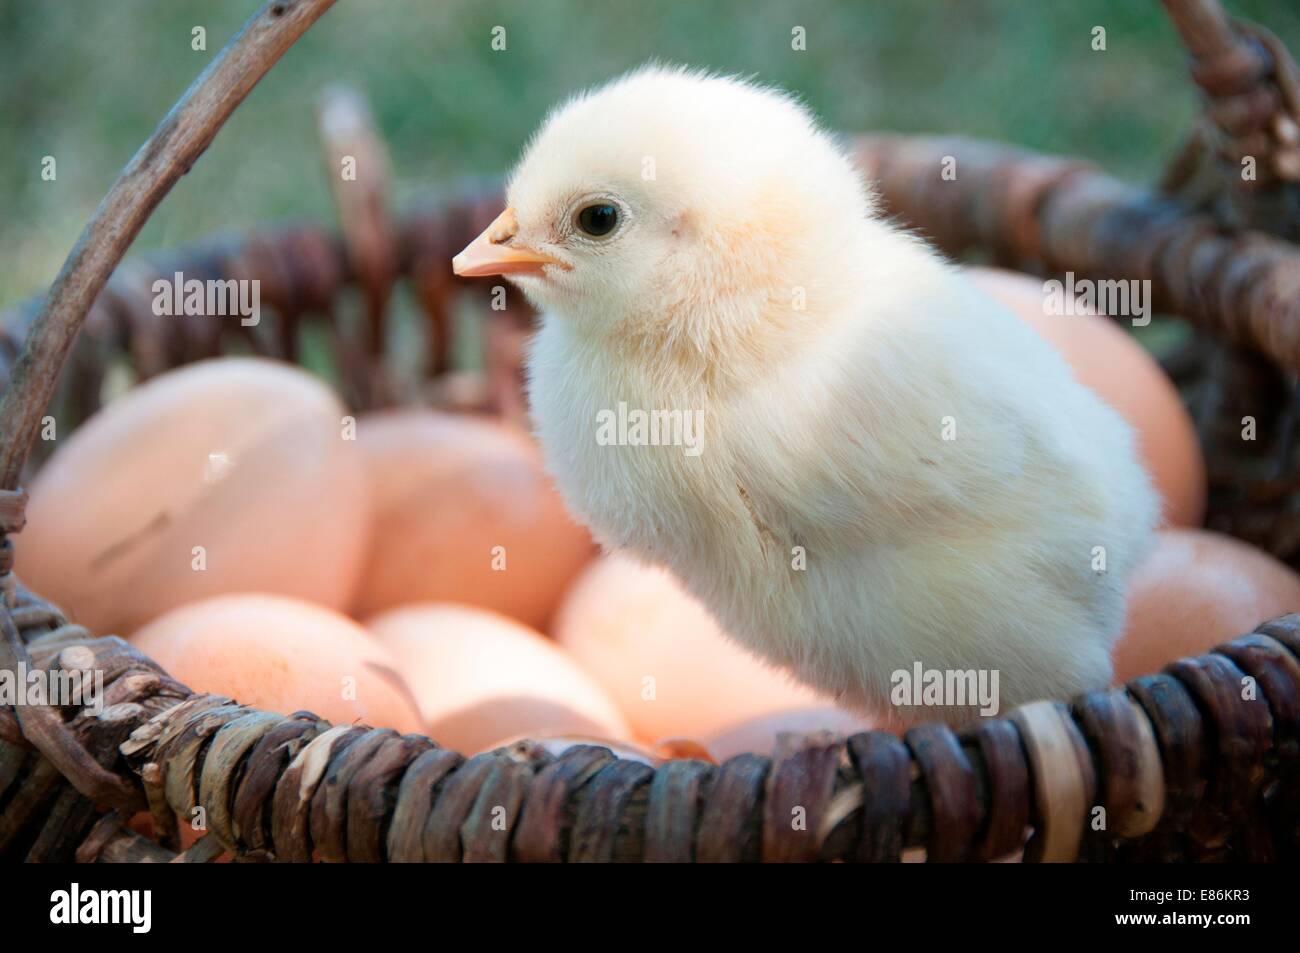 Chick in a basket with eggs Stock Photo